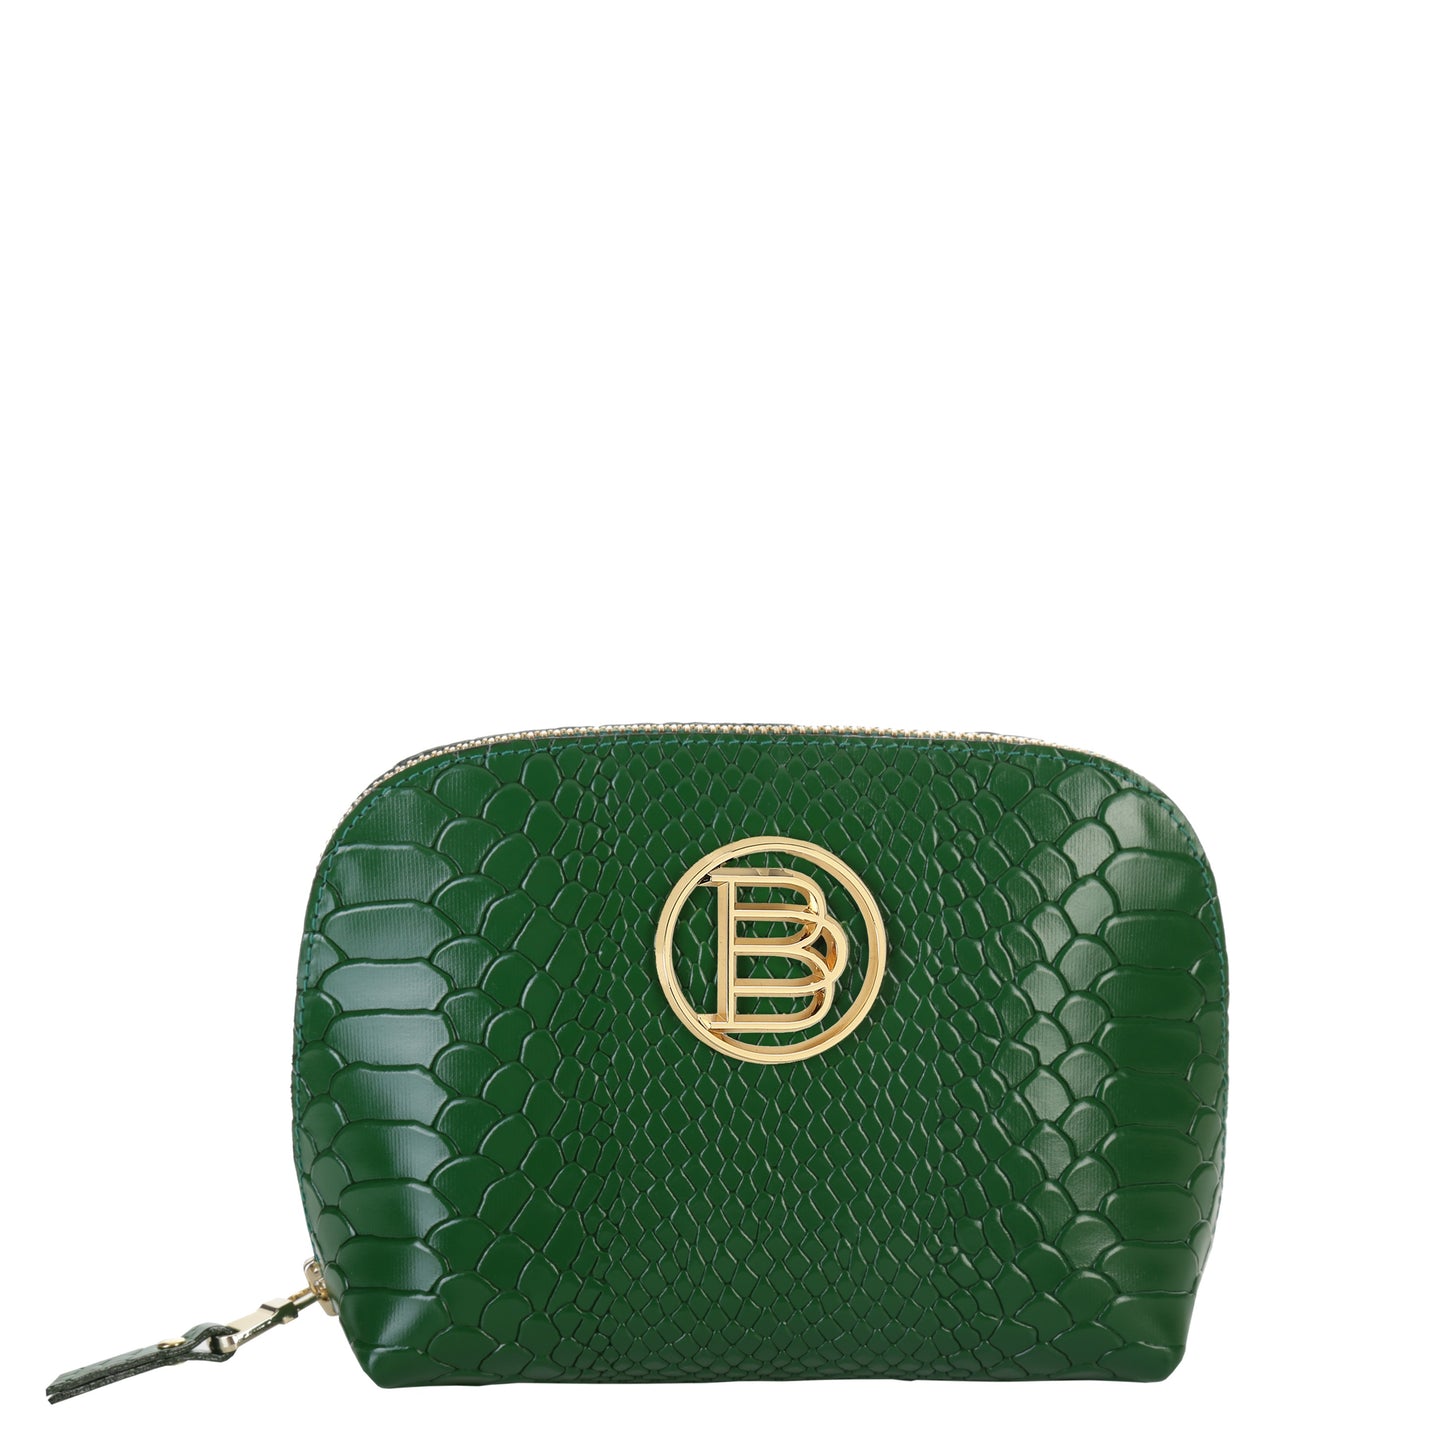 GREEN leather women's cosmetic bag